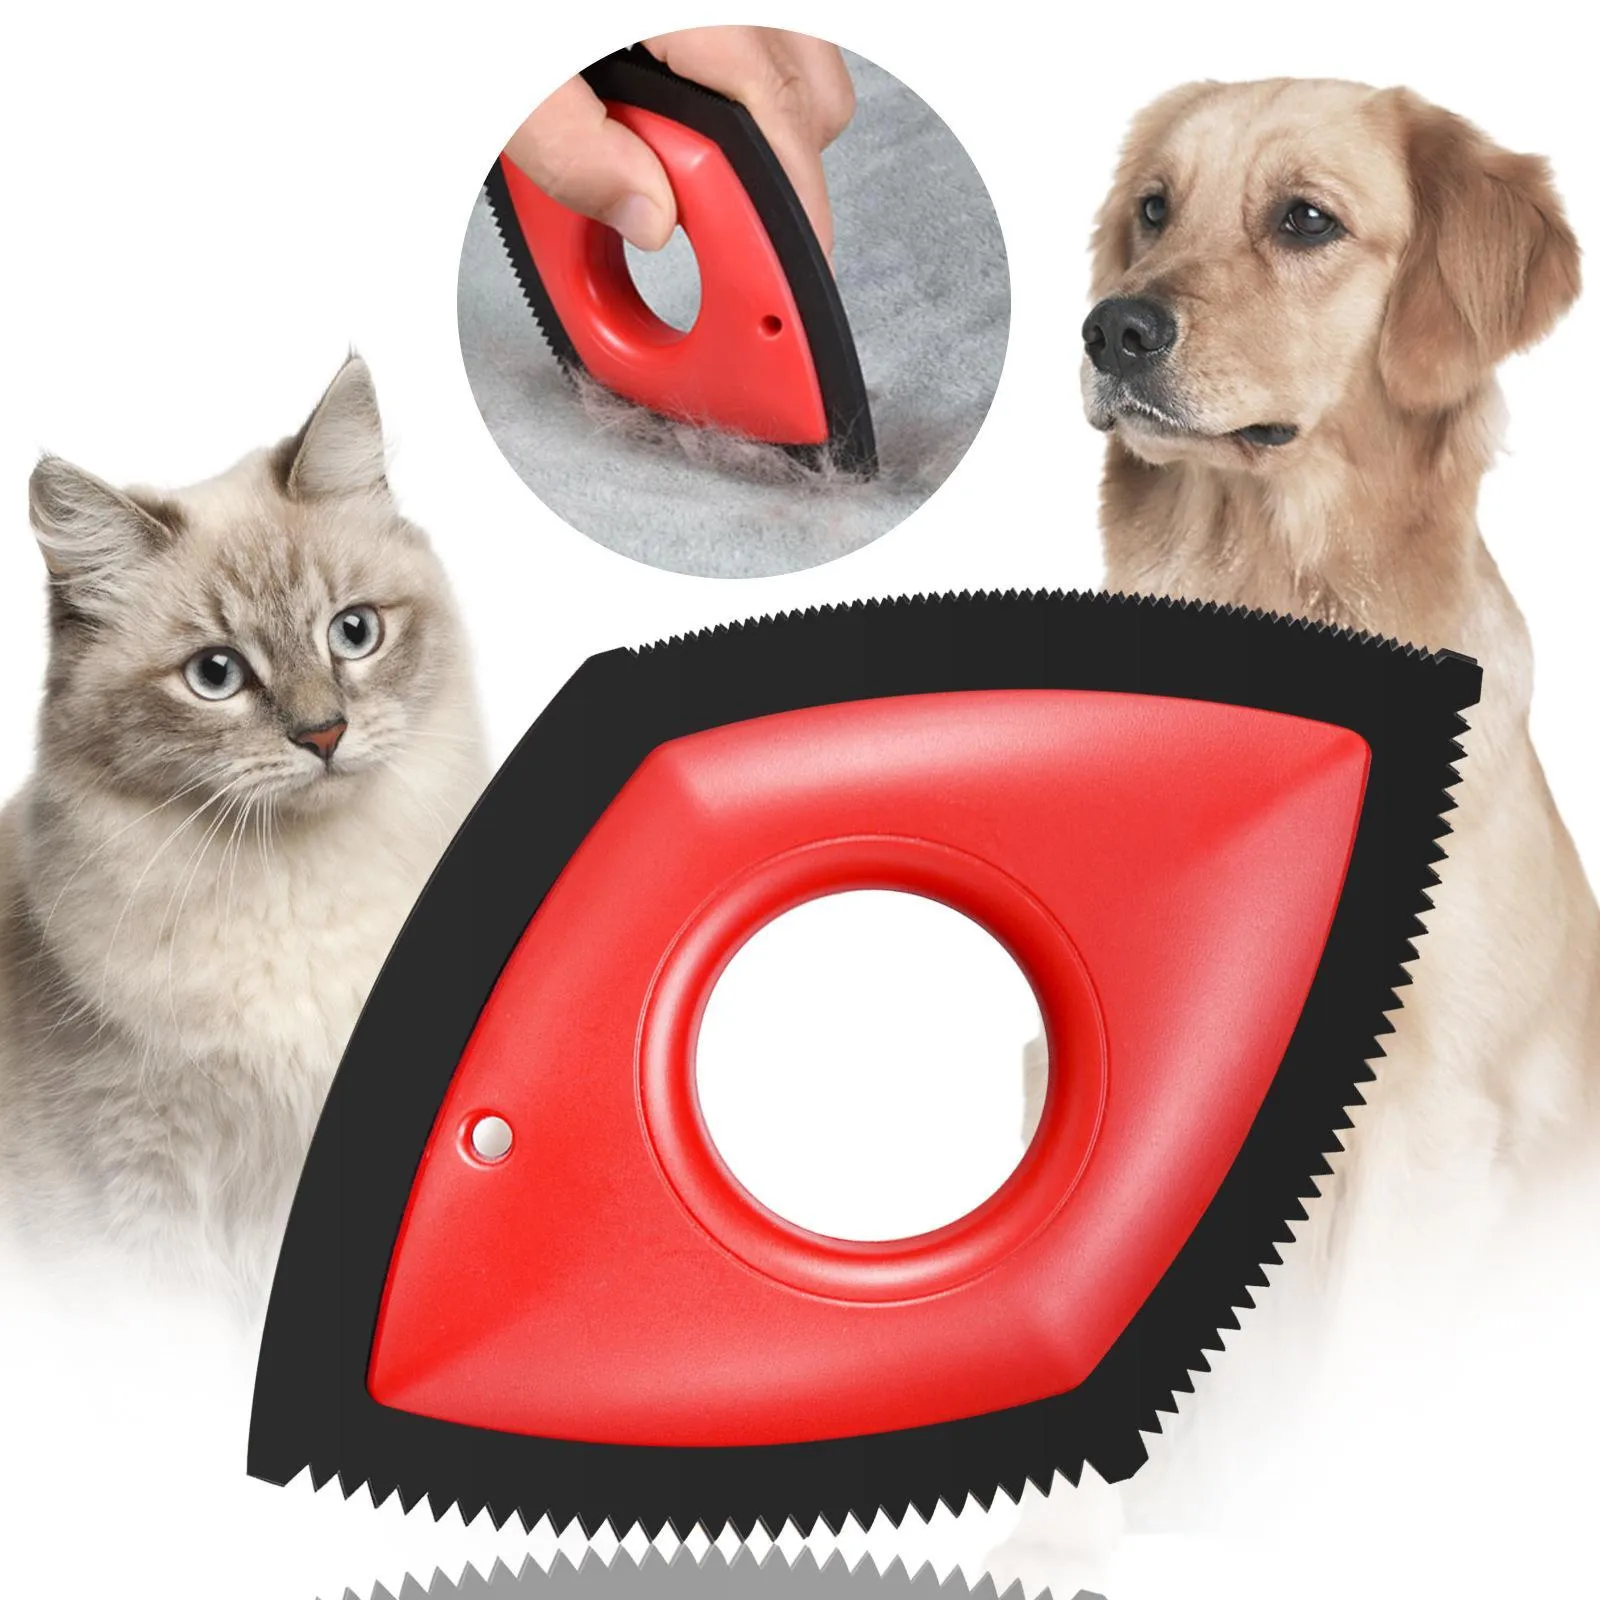 Professional Mini Pet Hair Detailer Dog Cat Remover Brush for Cleaning Carpets, Sofas, Home Furnishings and Car Interiors